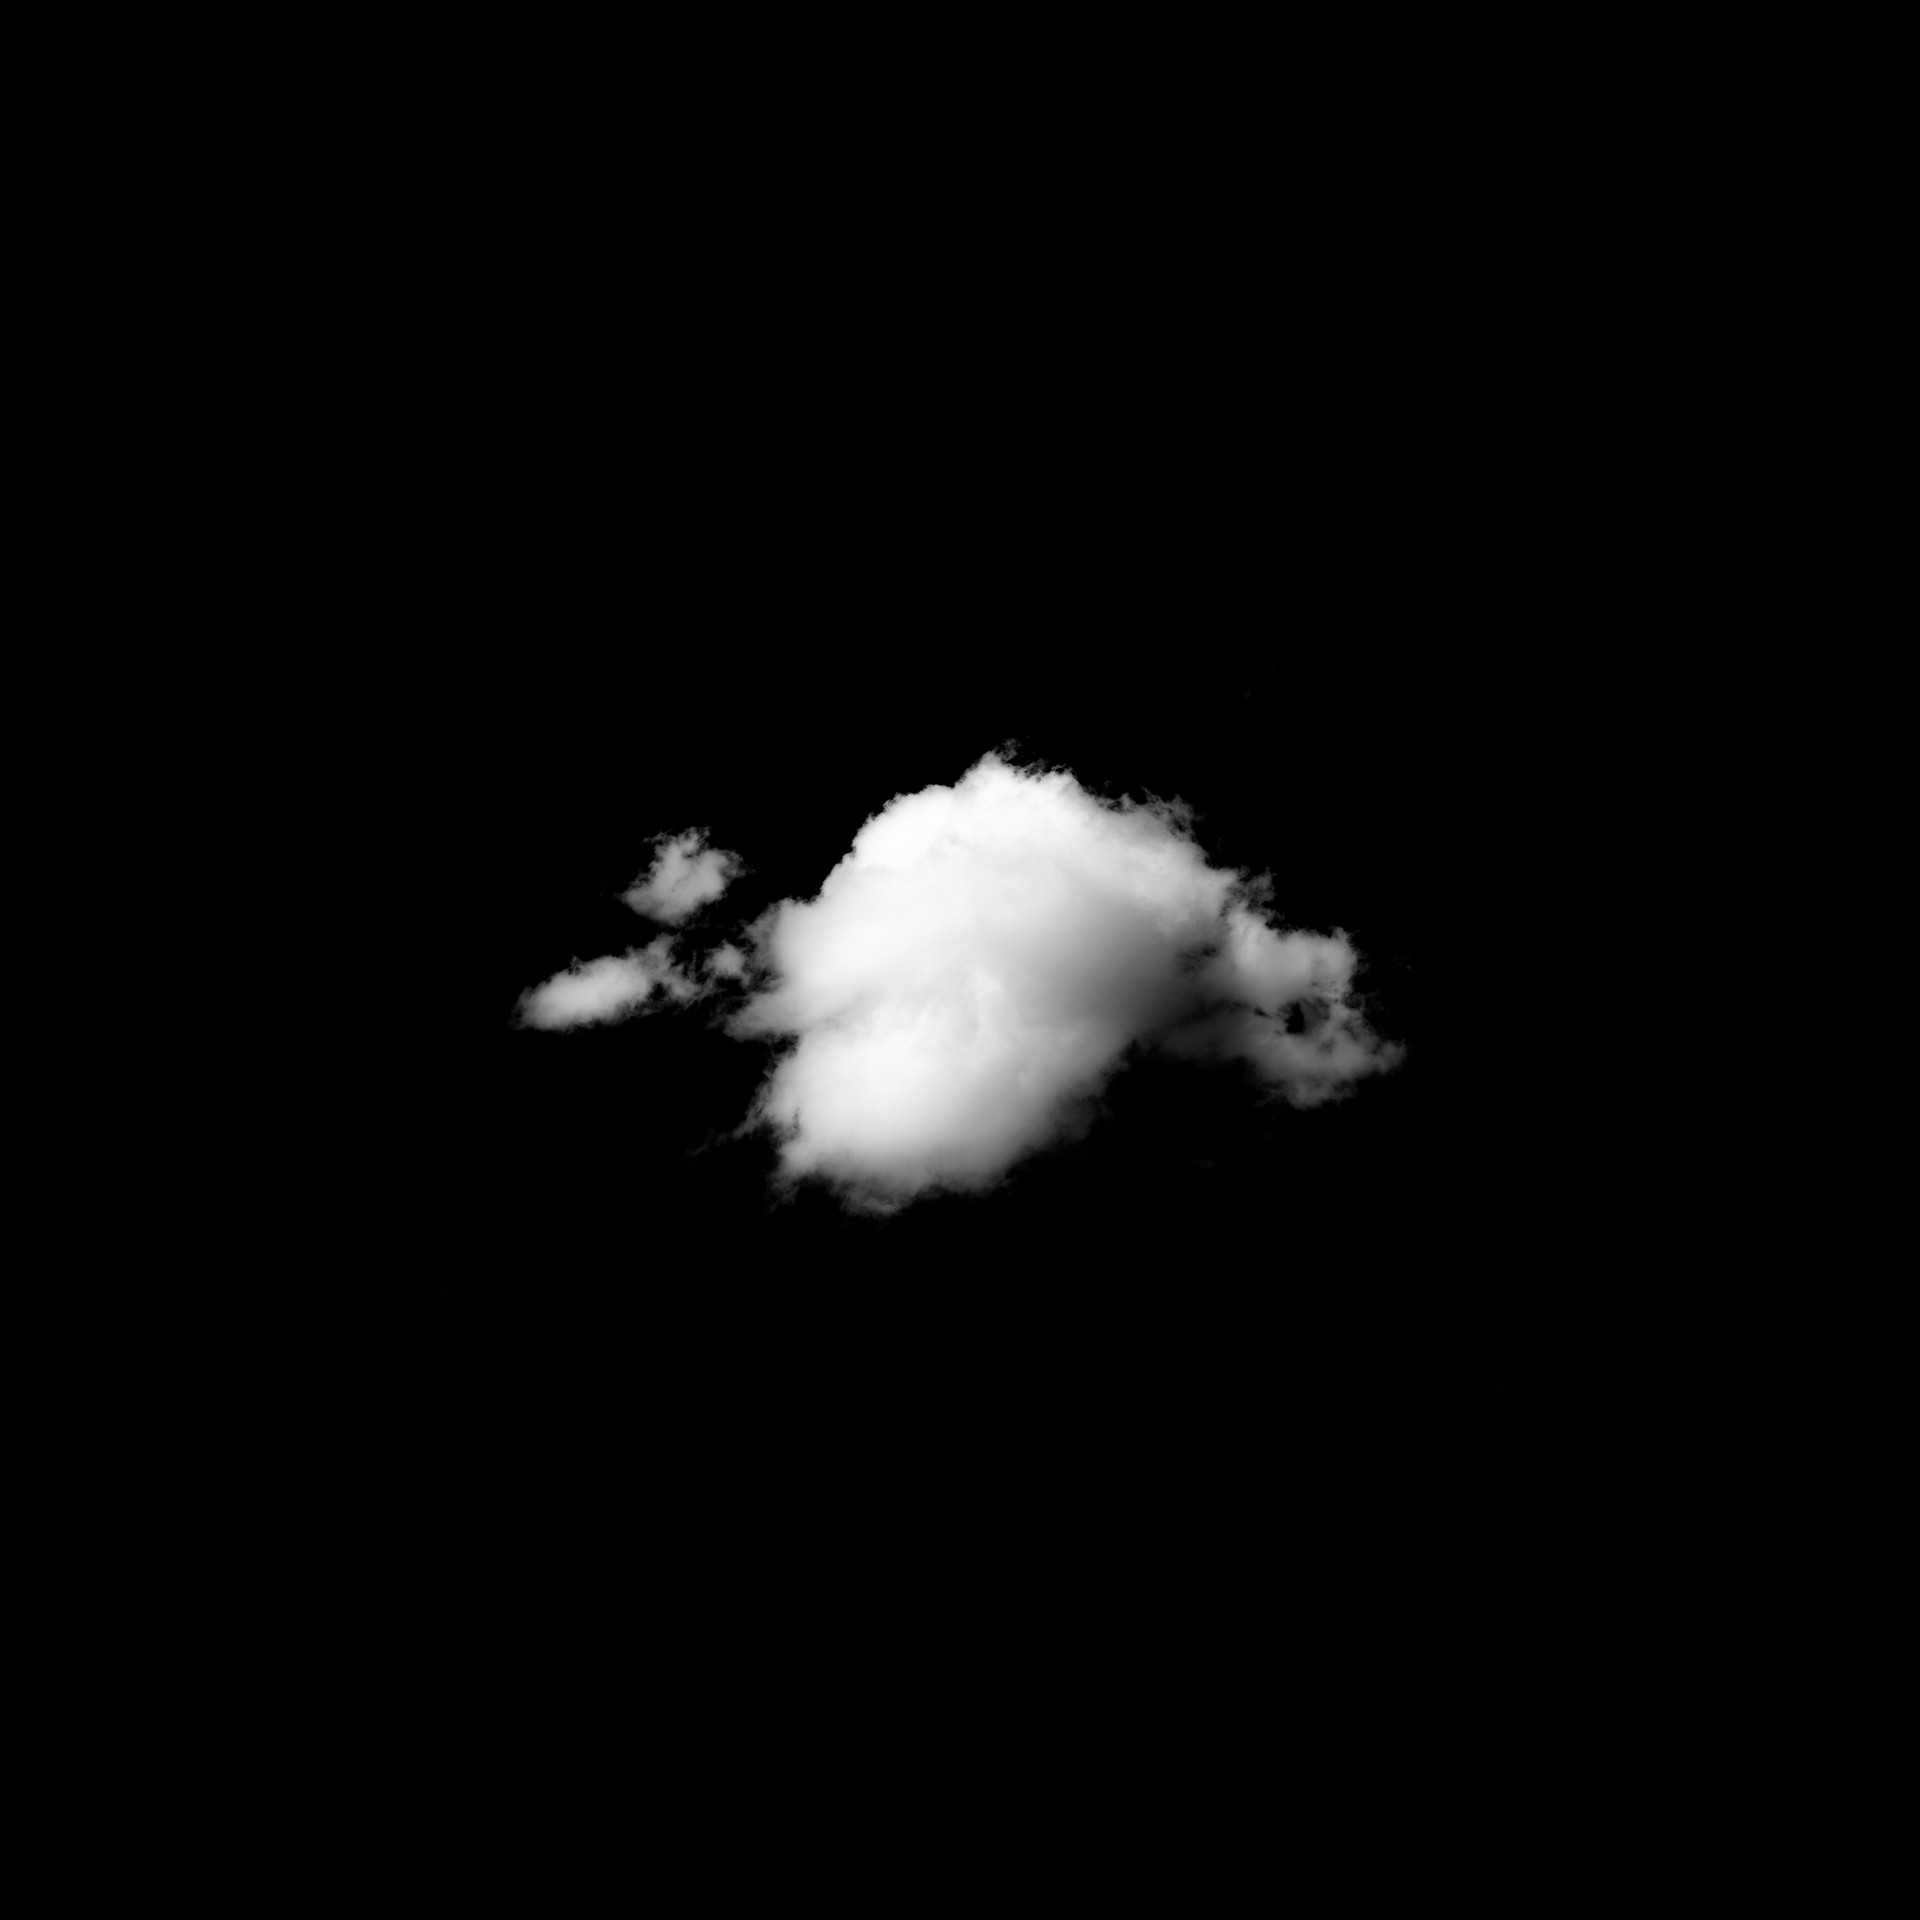 Cloud Objects 2020 #1 by Peter McLennan